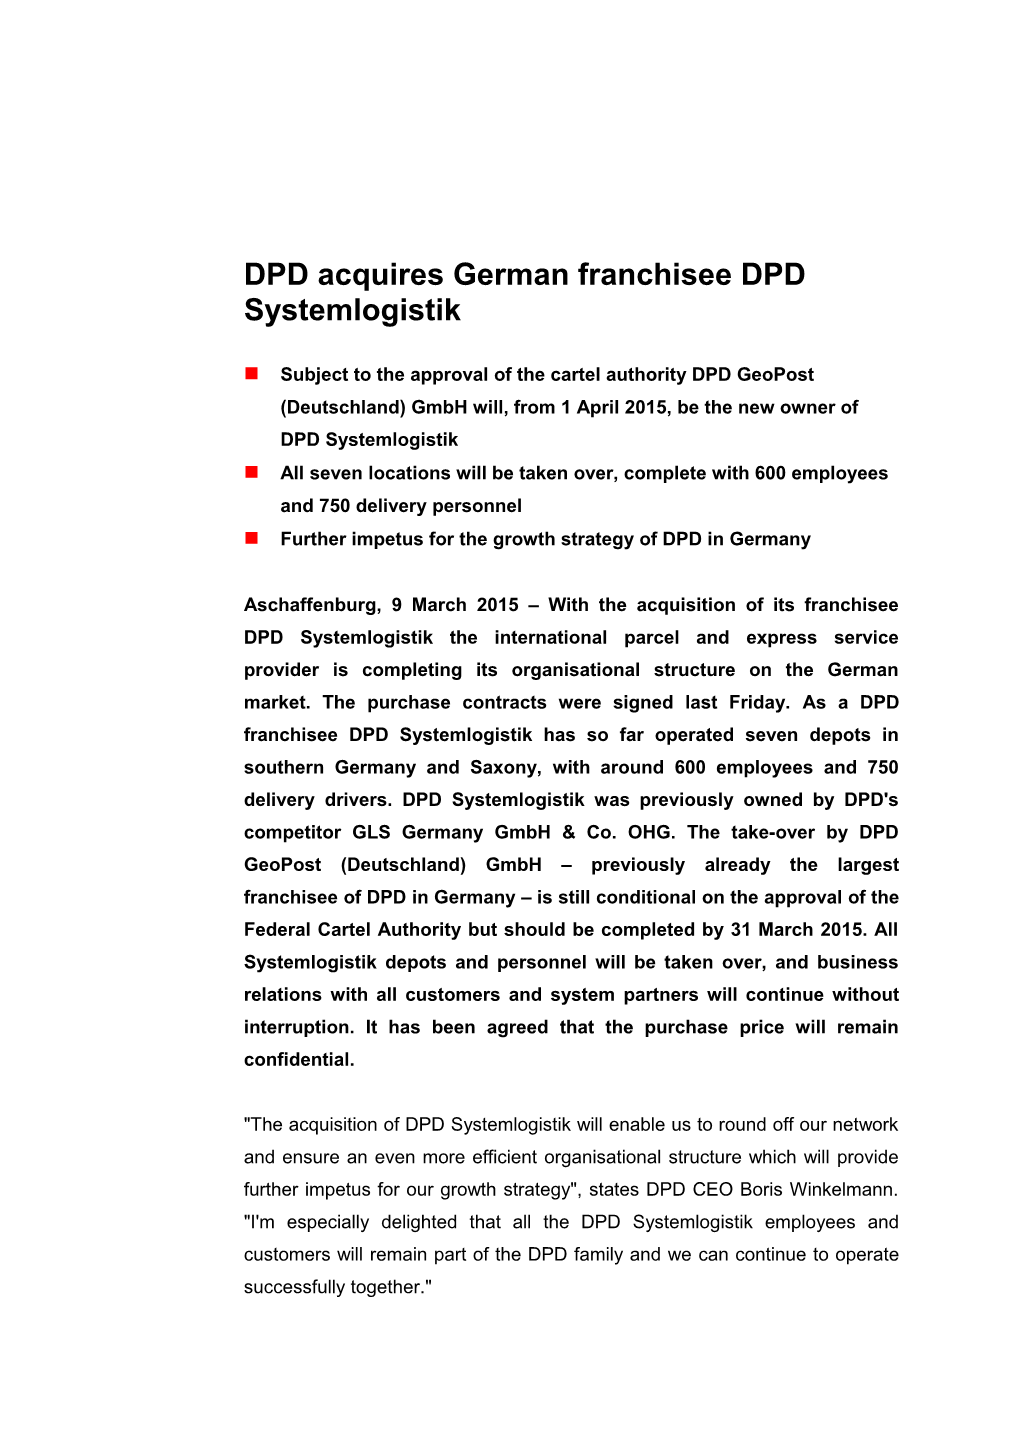 DPD Acquires German Franchisee DPD Systemlogistik